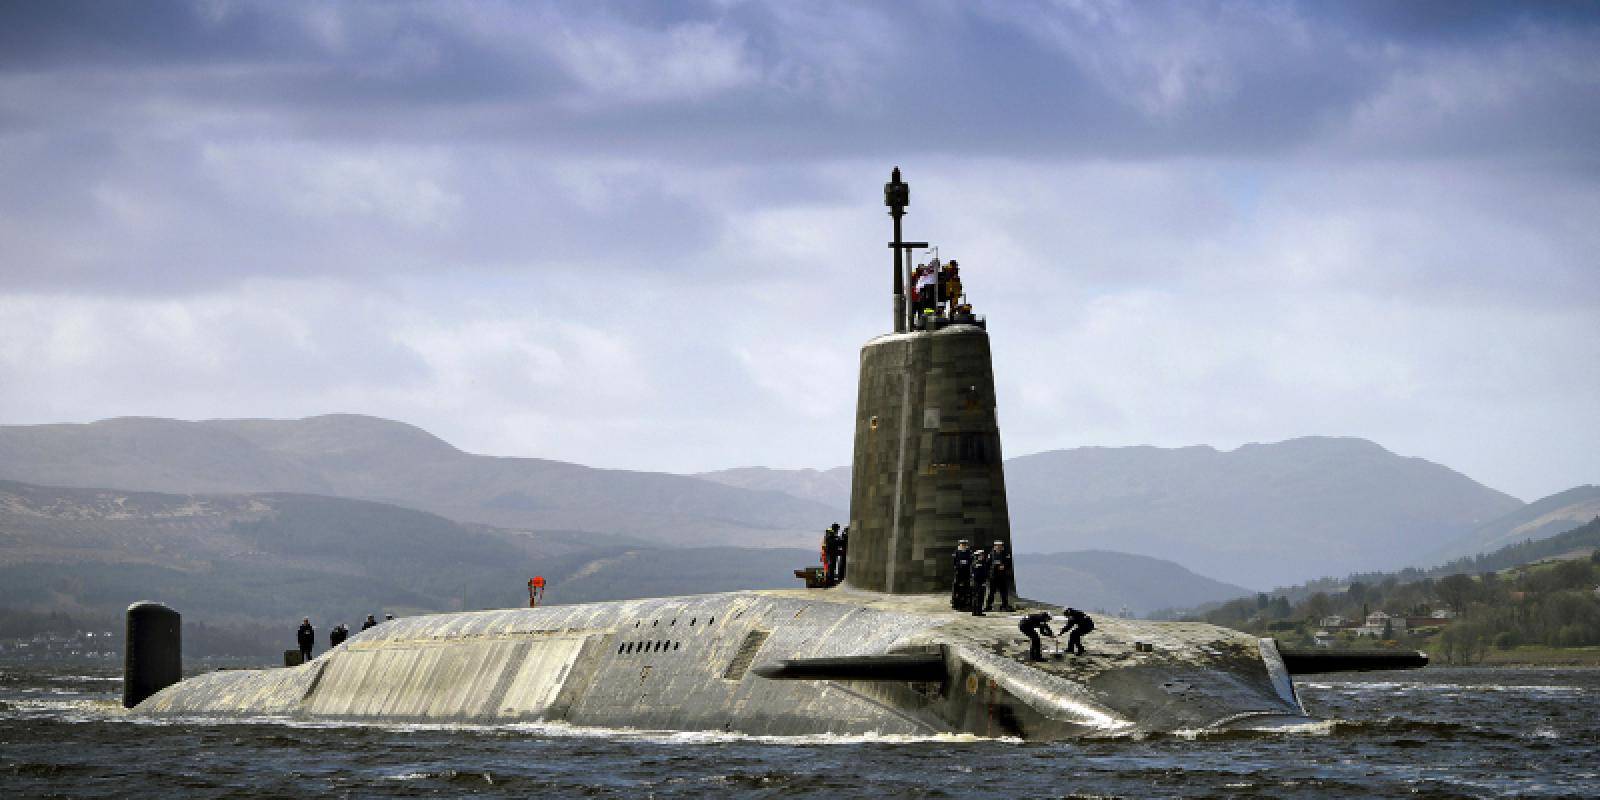 Royal Navy Vanguard Class submarine HMS Vigilant returning to HMNB Clyde after extended deployment. The four Vanguard-class submarines form the UK's strategic nuclear deterrent force. Photo: Ministry of Defence.